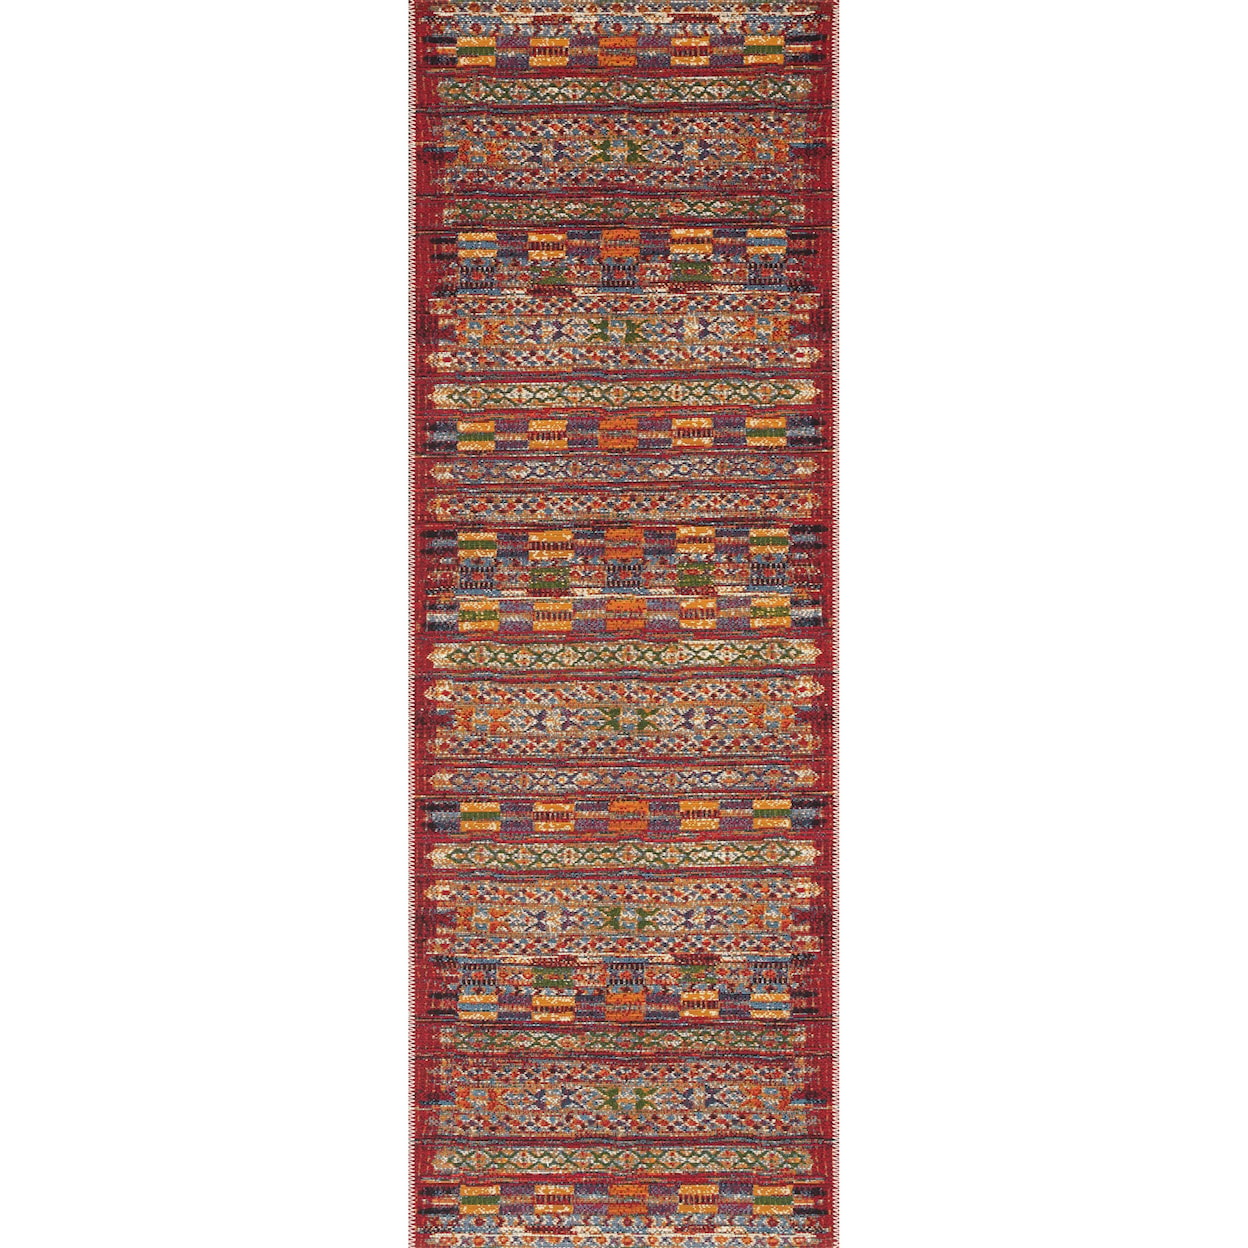 Reeds Rugs Mika 3'11" x 5'11" Red / Multi Rug